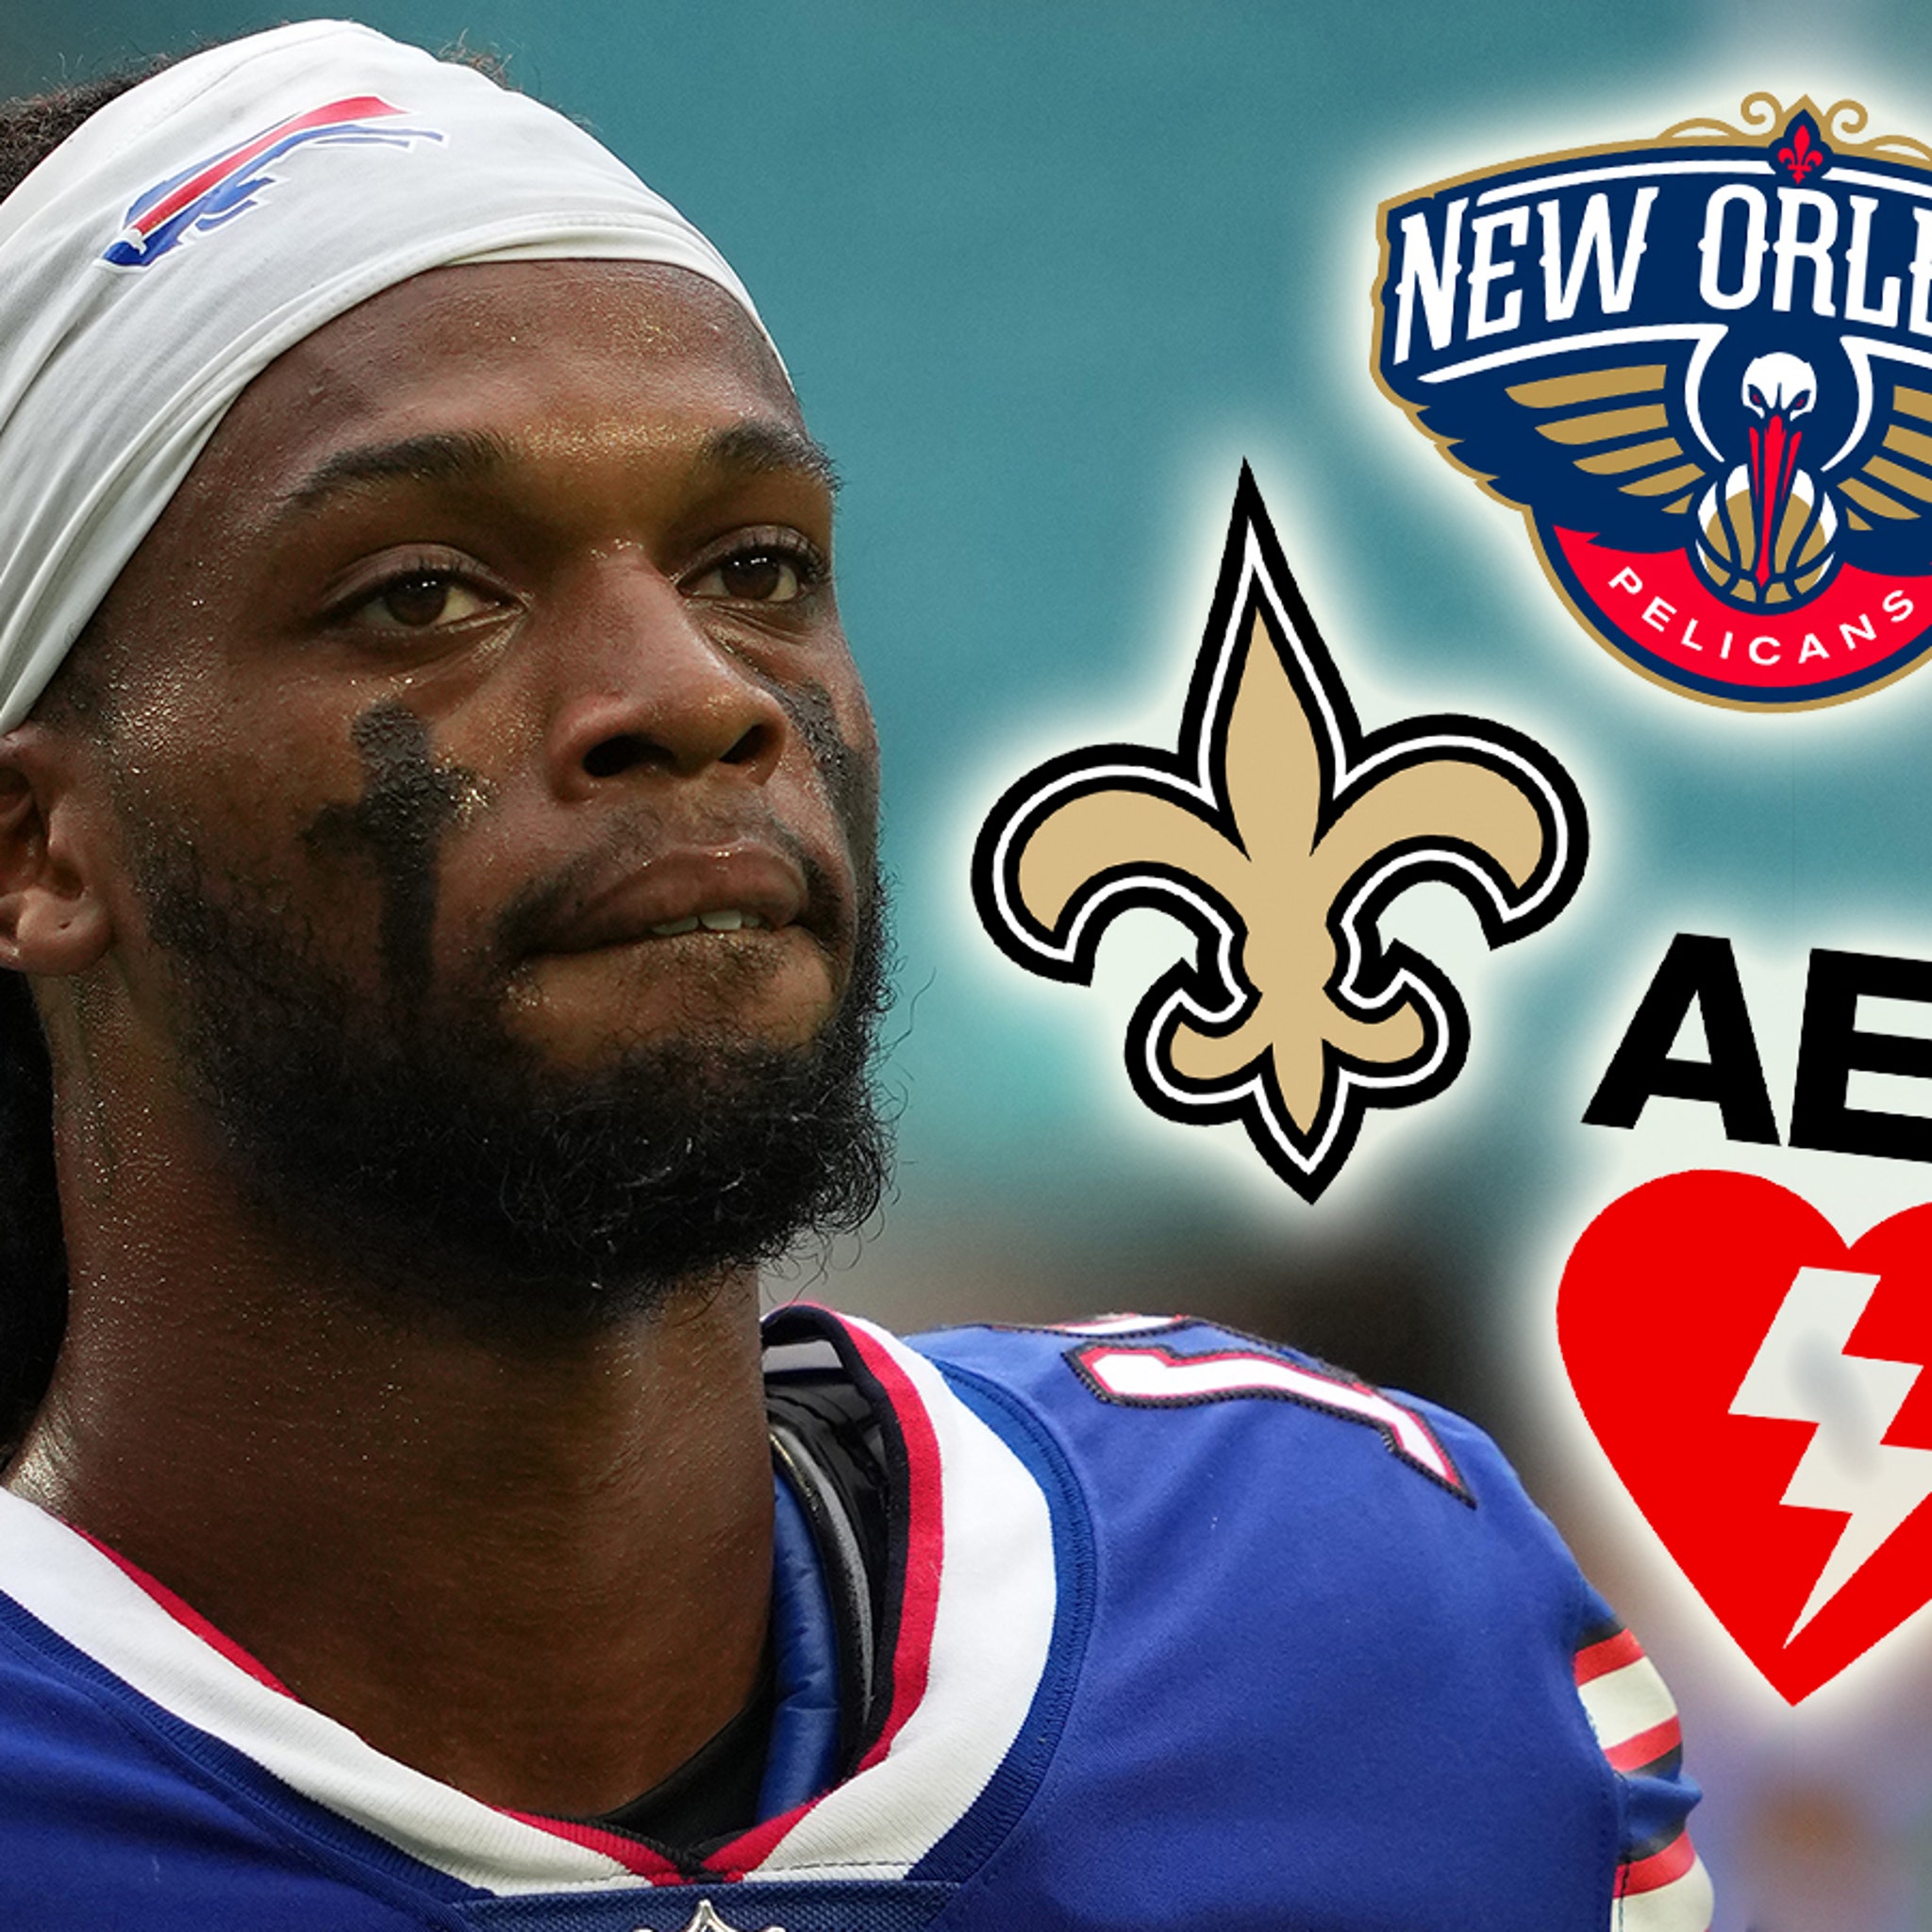 Saints, Pelicans Donating AEDs To Local Facilities In Wake Of